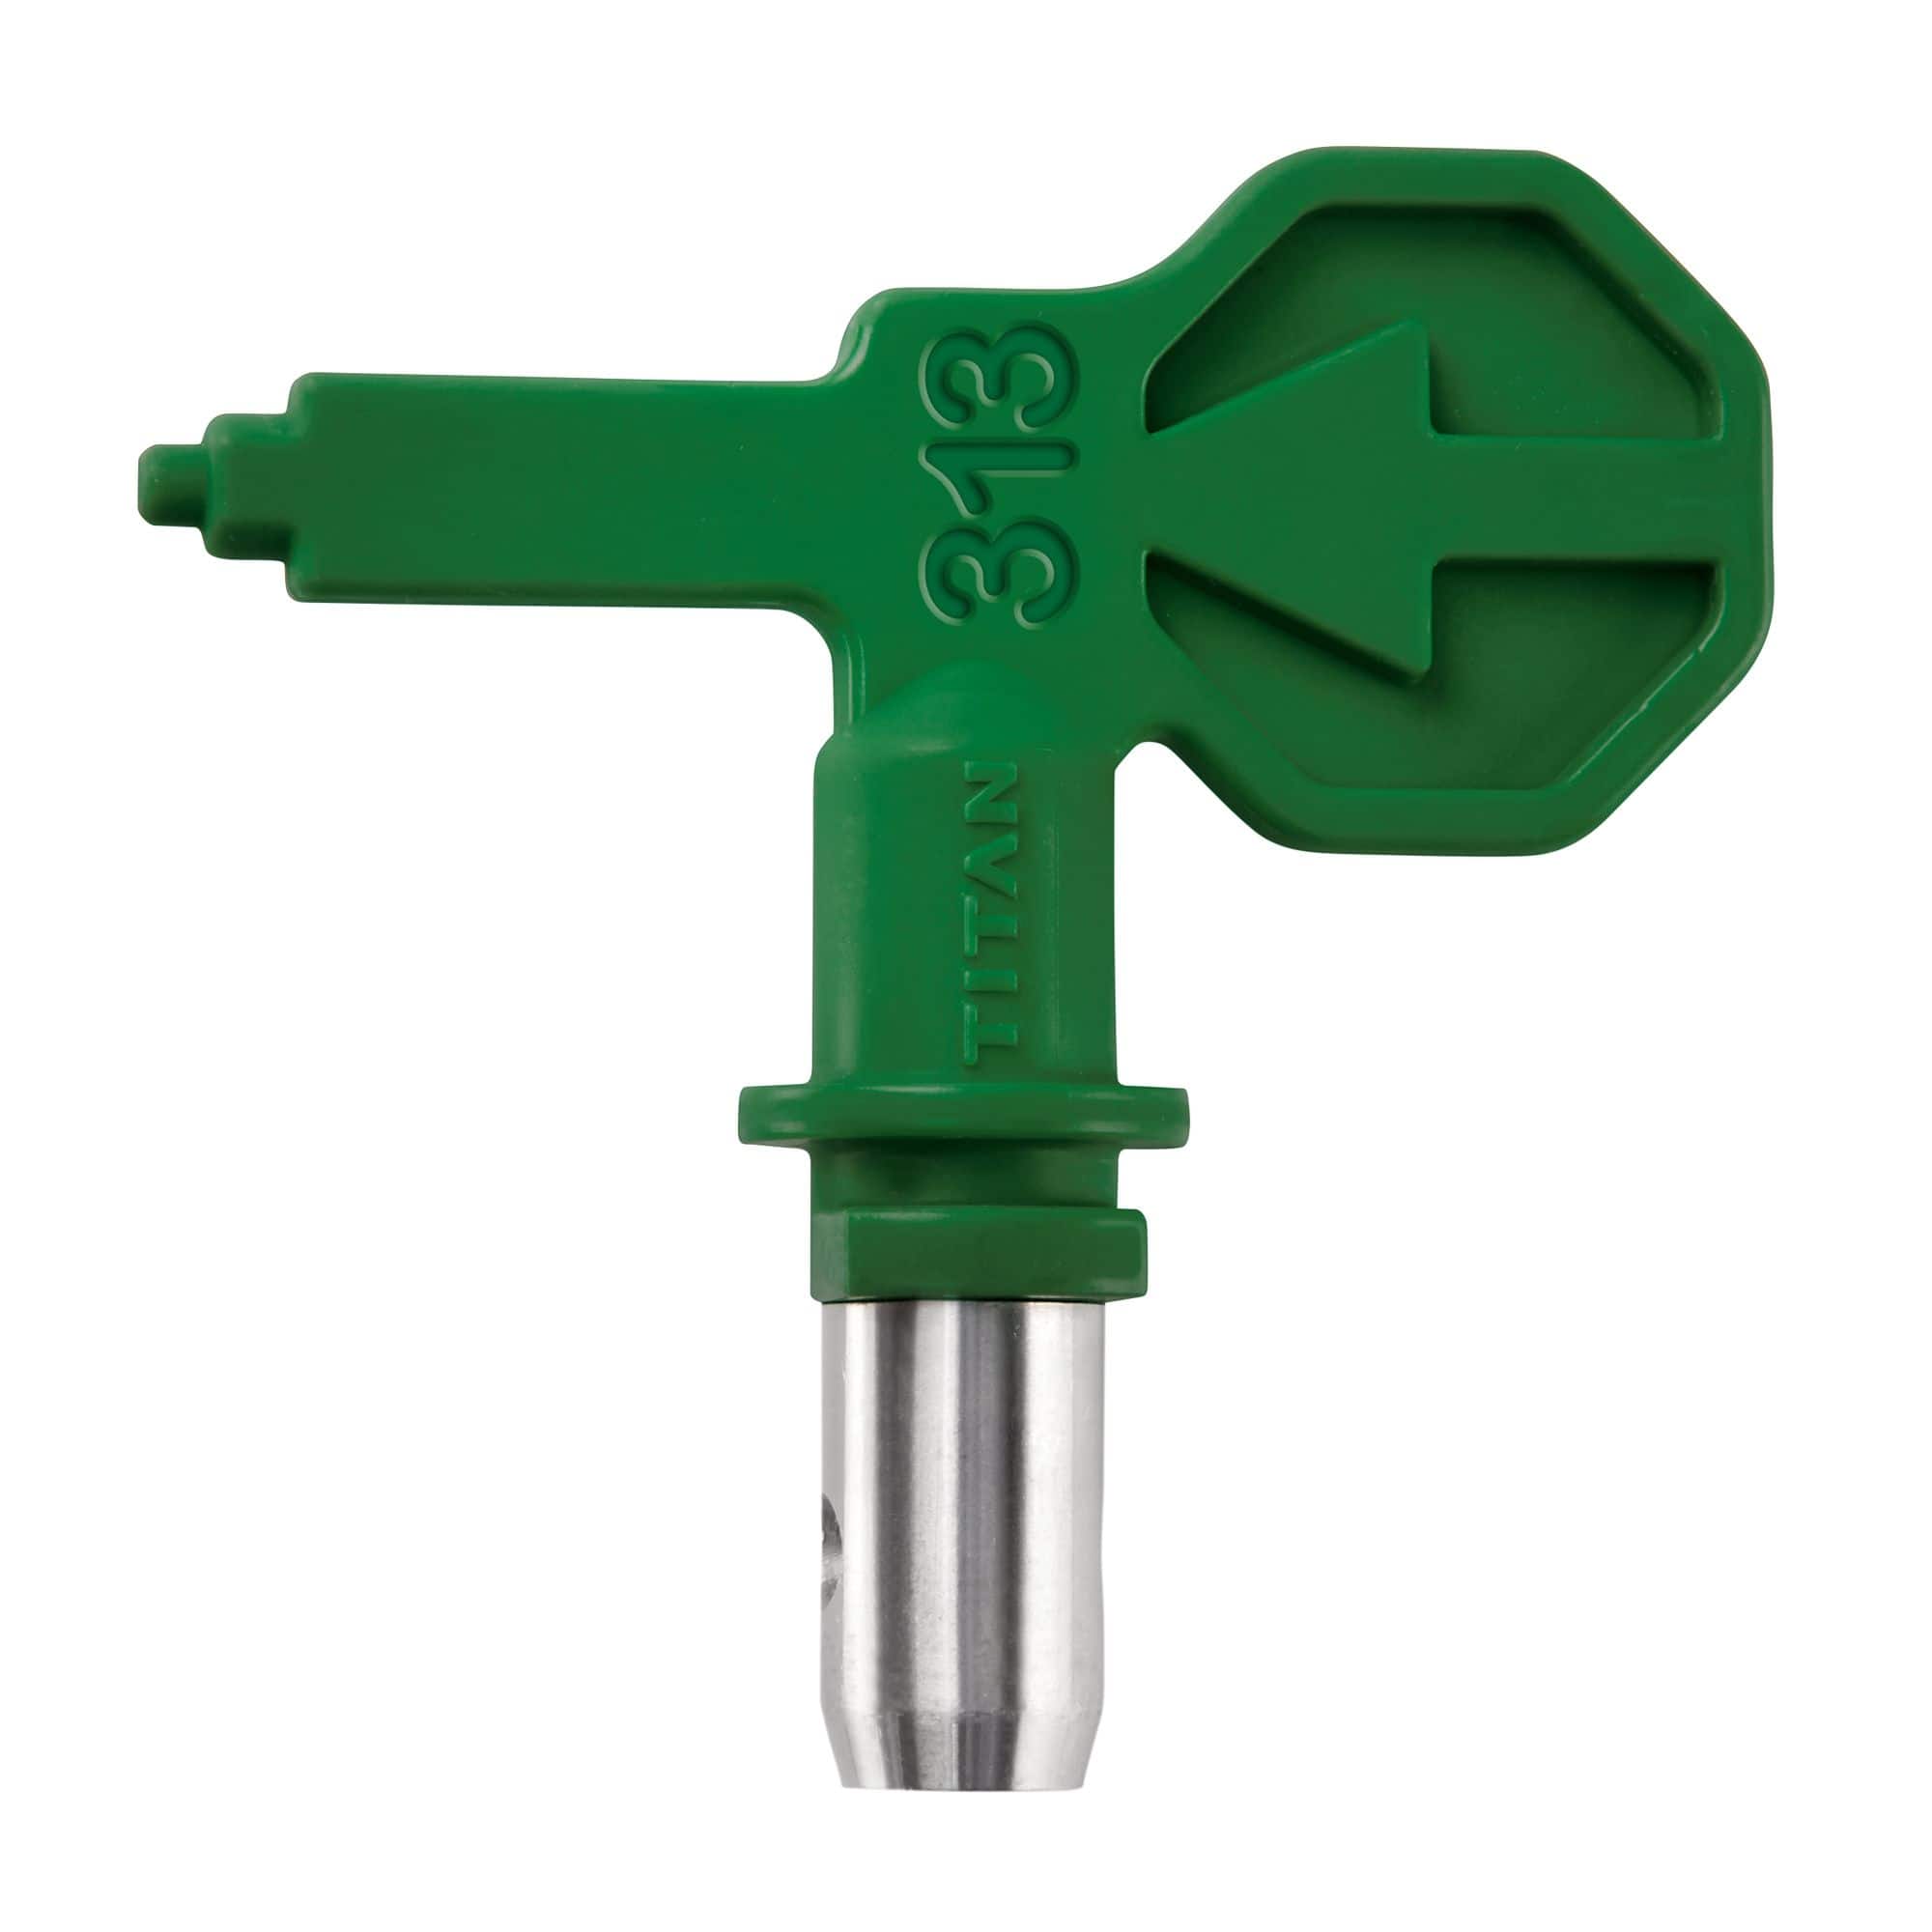 Canada Hardware 3109 Vista Green Precisely Matched For Paint and Spray Paint